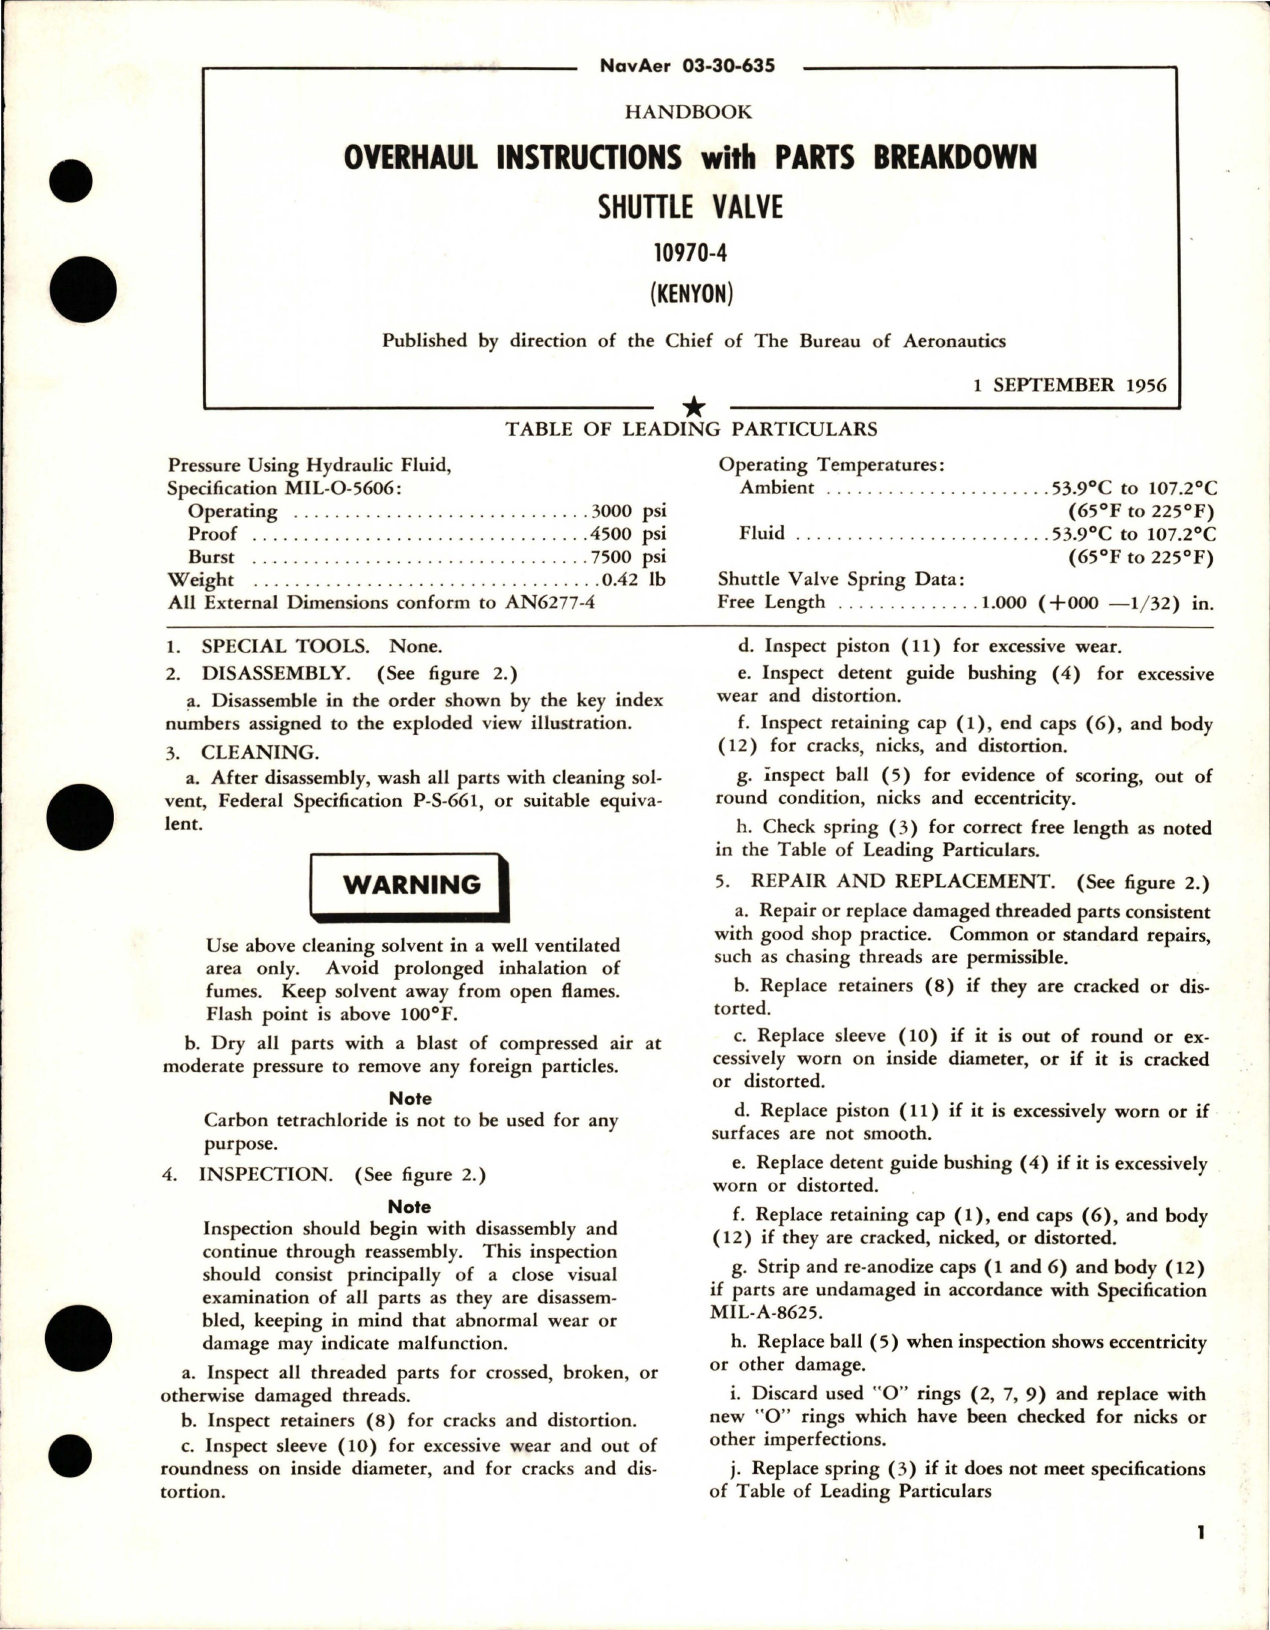 Sample page 1 from AirCorps Library document: Overhaul Instructions with Parts Breakdown from Shuttle Valve - 10970-4